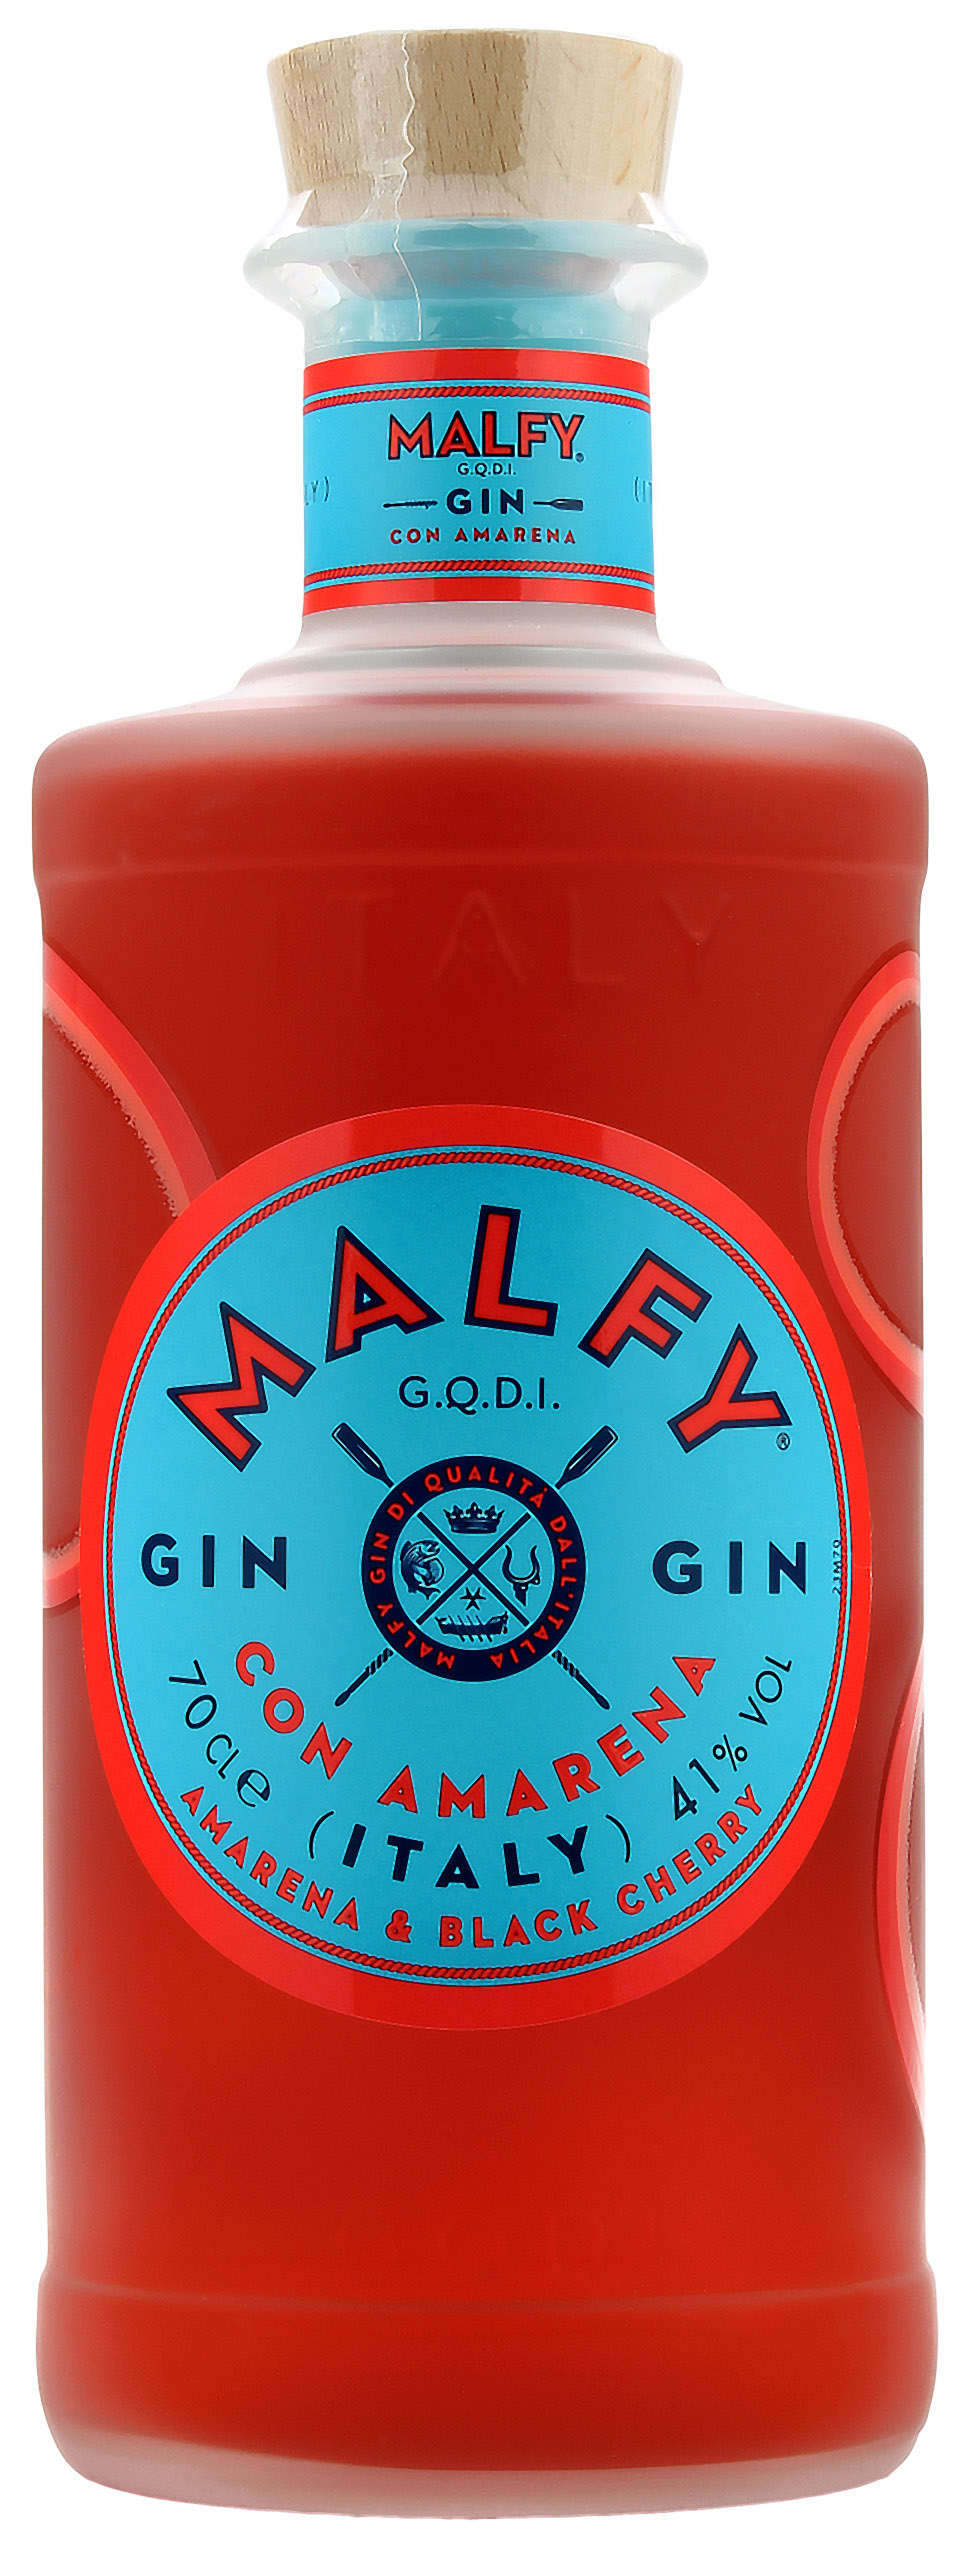 Malfy Gin Amarena Limited Edition 41.0% 0,7l